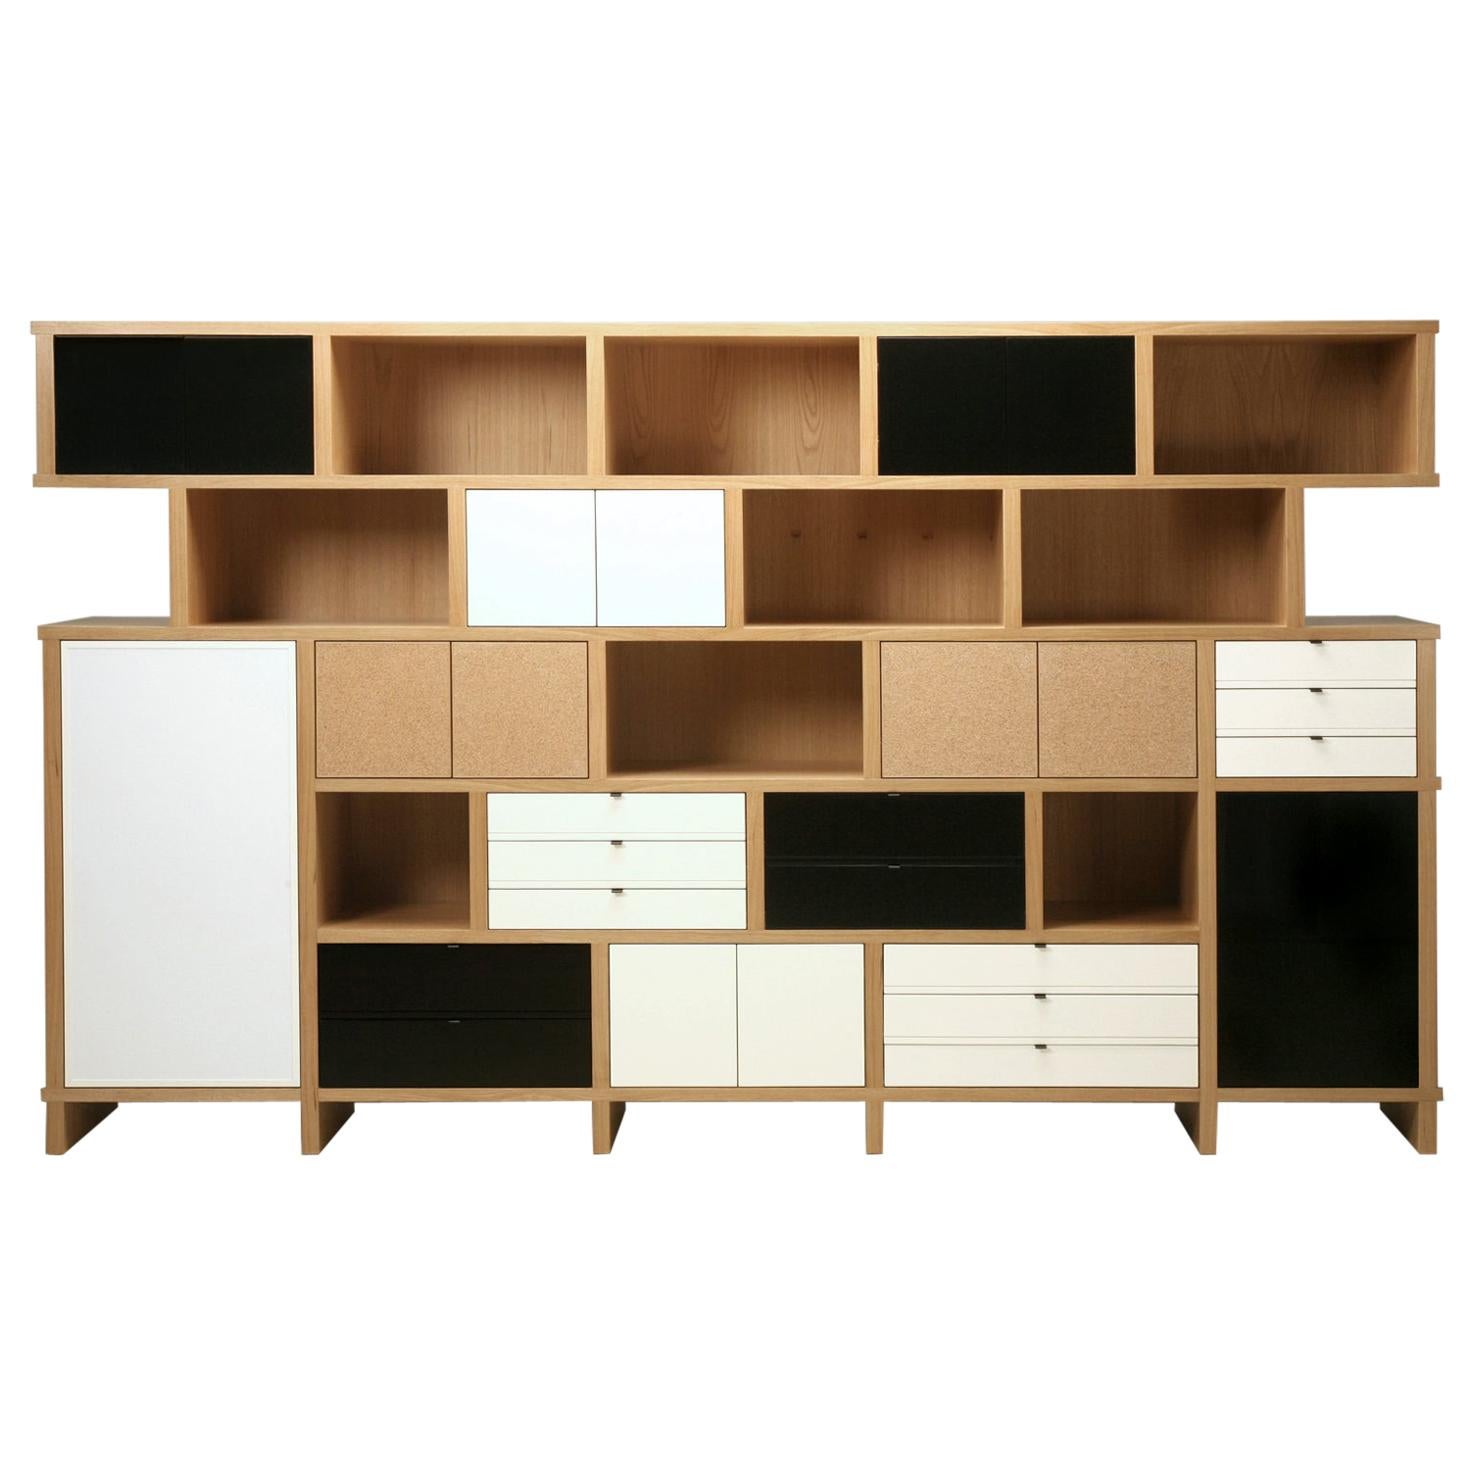 Custom Hand-Crafted Bookcase Inspired by Charlotte Perriand and Built to Order